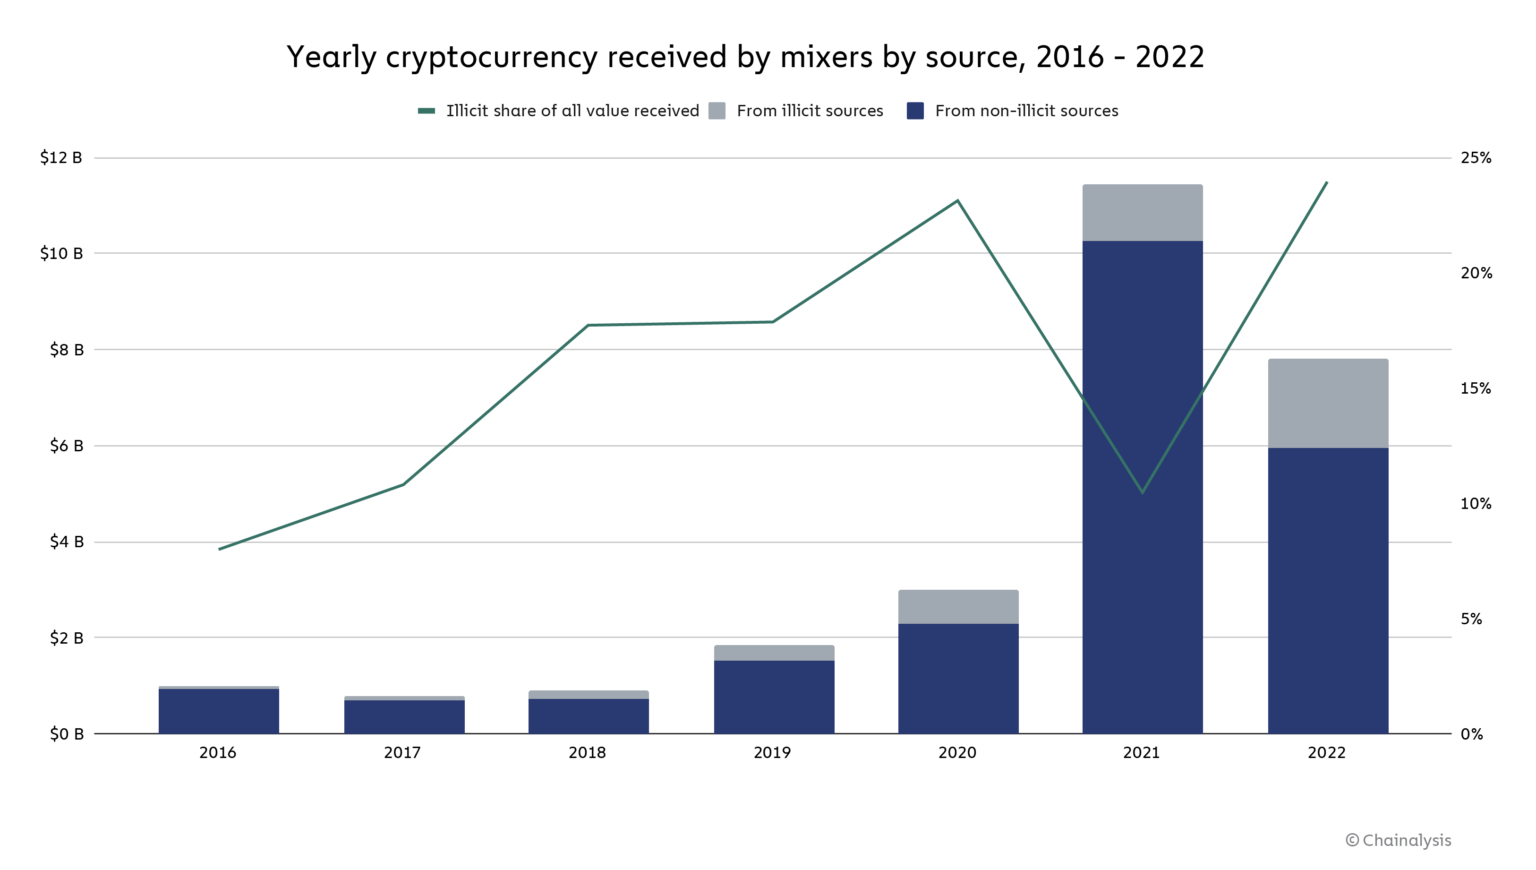 Yearly cryptocurrency received by mixers by source, 2016-2022, Source: Chainalysis, Jan 2023